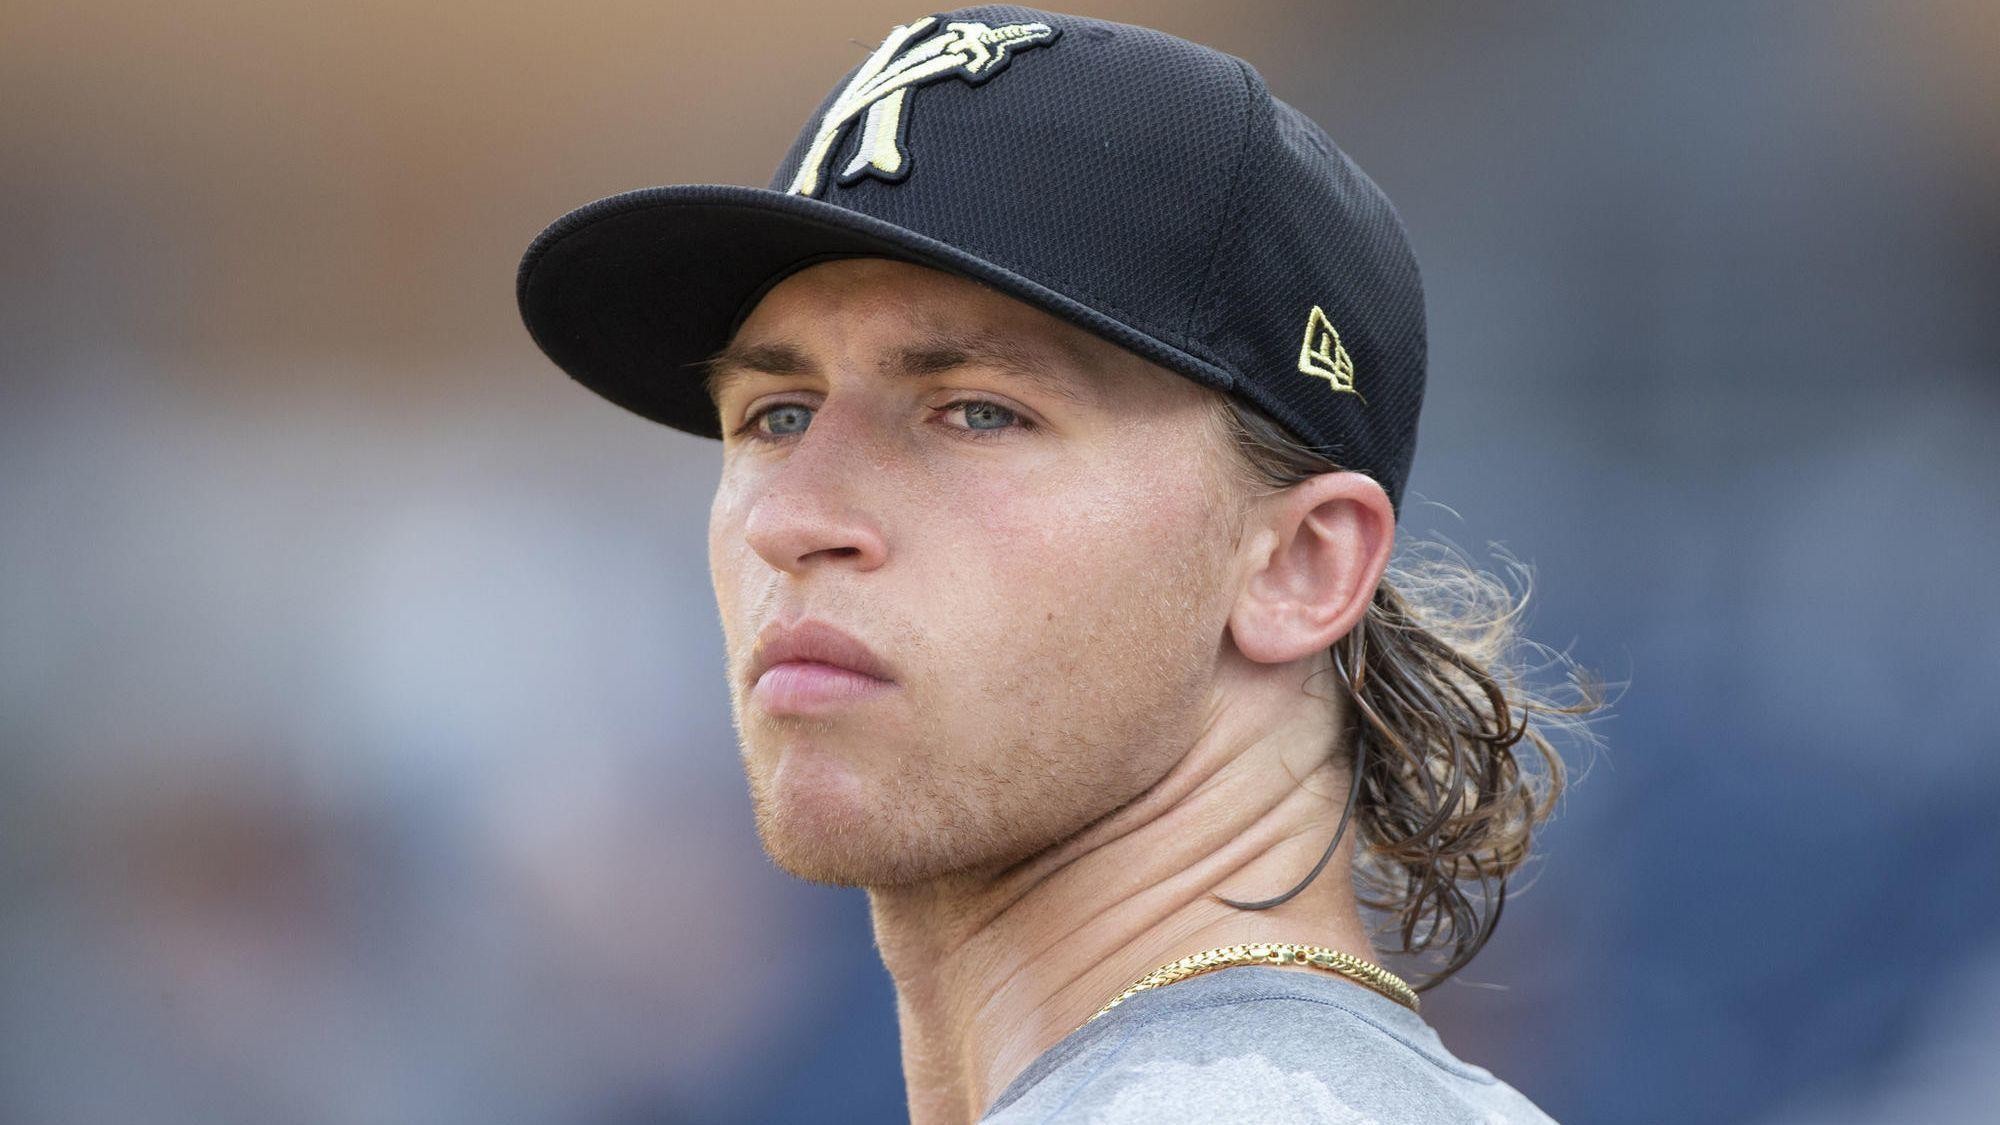 When future White Sox stud Michael Kopech pitches, you can’t look away